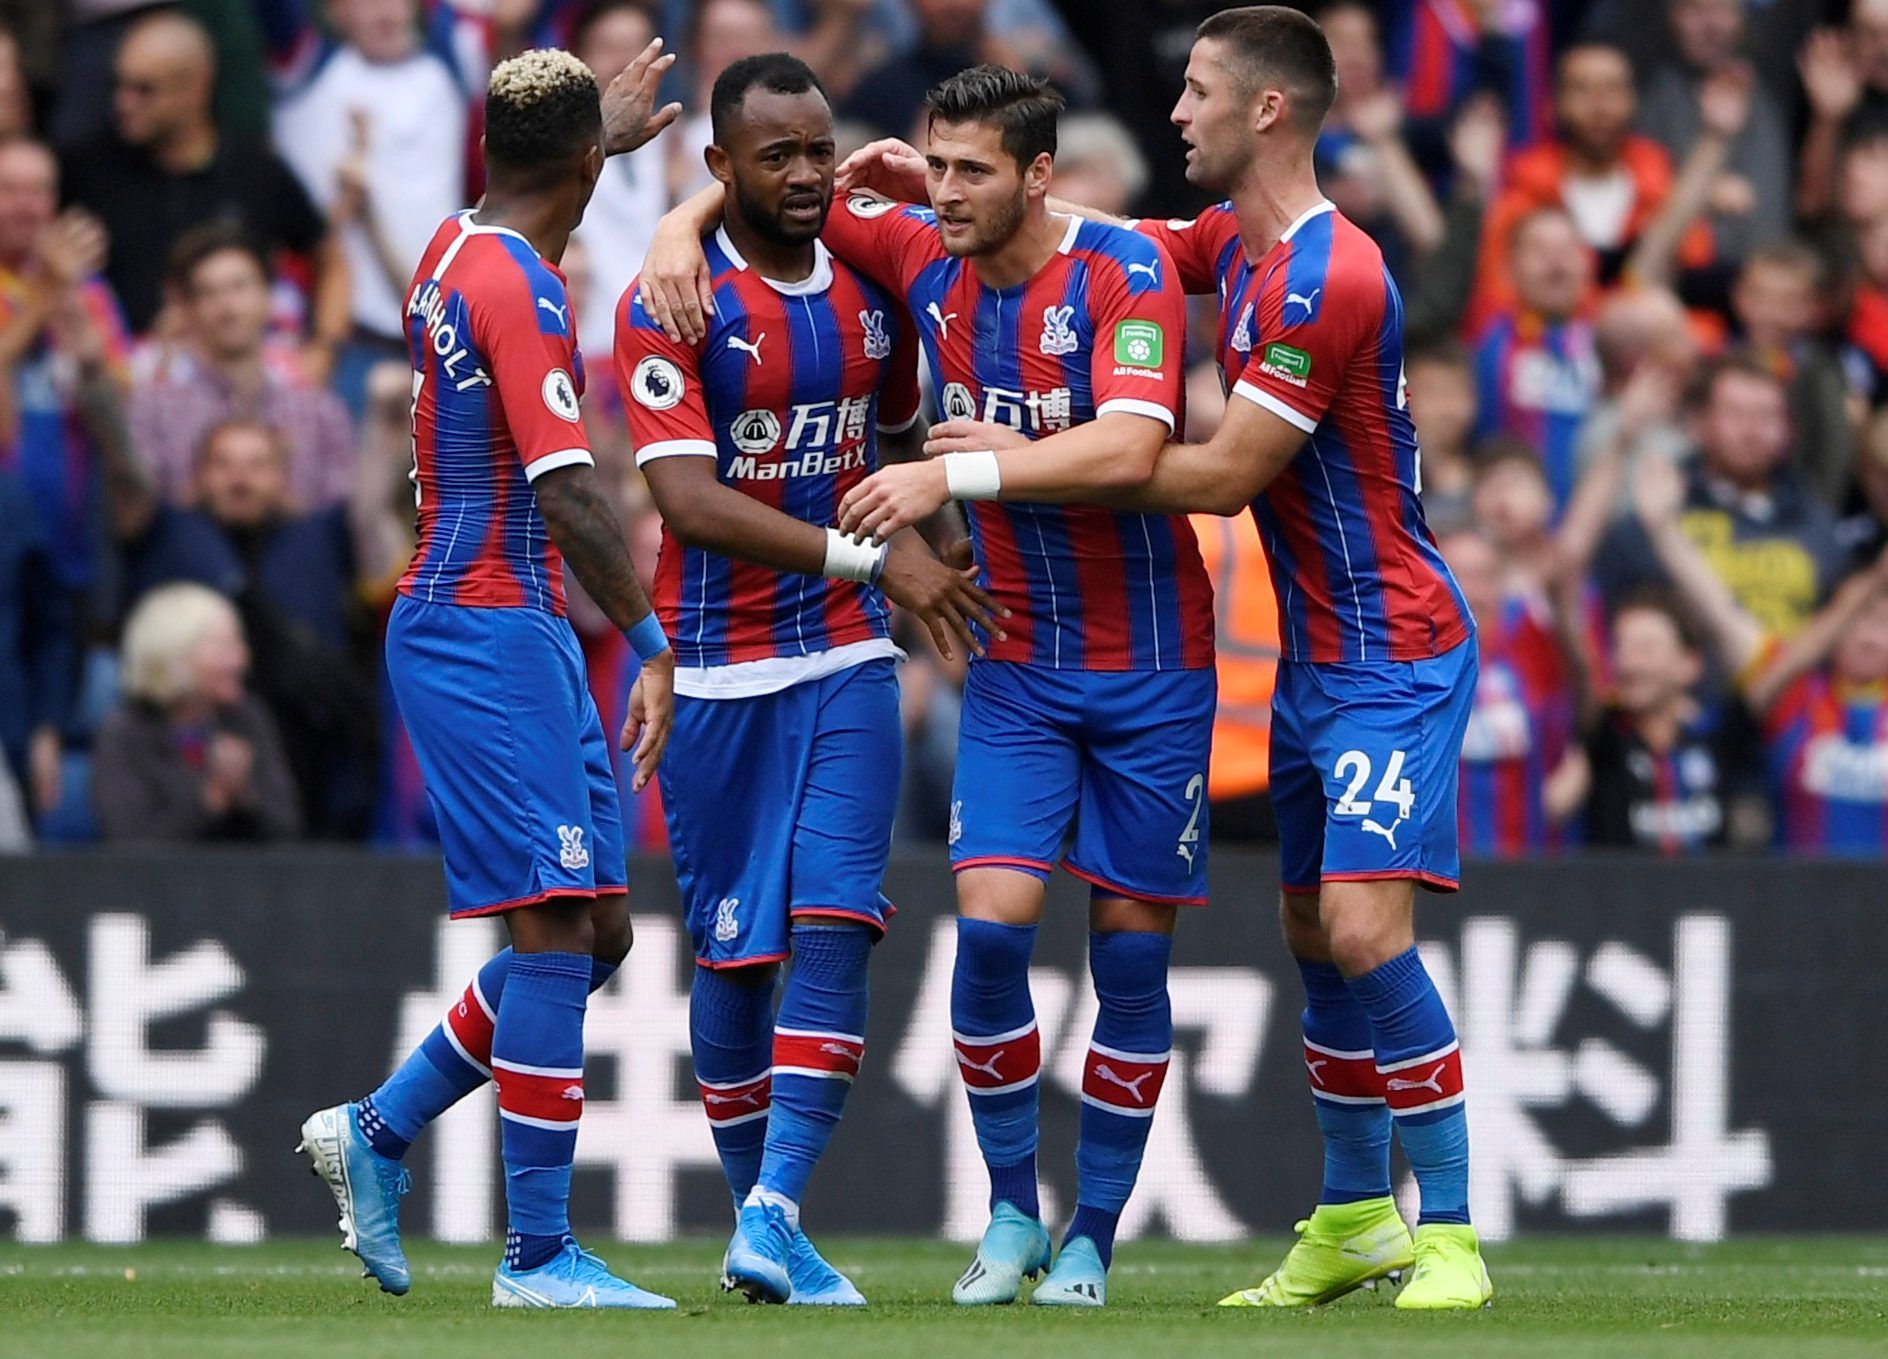 Soccer Football - Premier League - Crystal Palace v Aston Villa - Selhurst Park, London, Britain - August 31, 2019  Crystal Palace's Jordan Ayew celebrates scoring their first goal with Joel Ward, Patrick van Aanholt and Gary Cahill        Action Images via Reuters/Tony O'Brien  EDITORIAL USE ONLY. No use with unauthorized audio, video, data, fixture lists, club/league logos or 